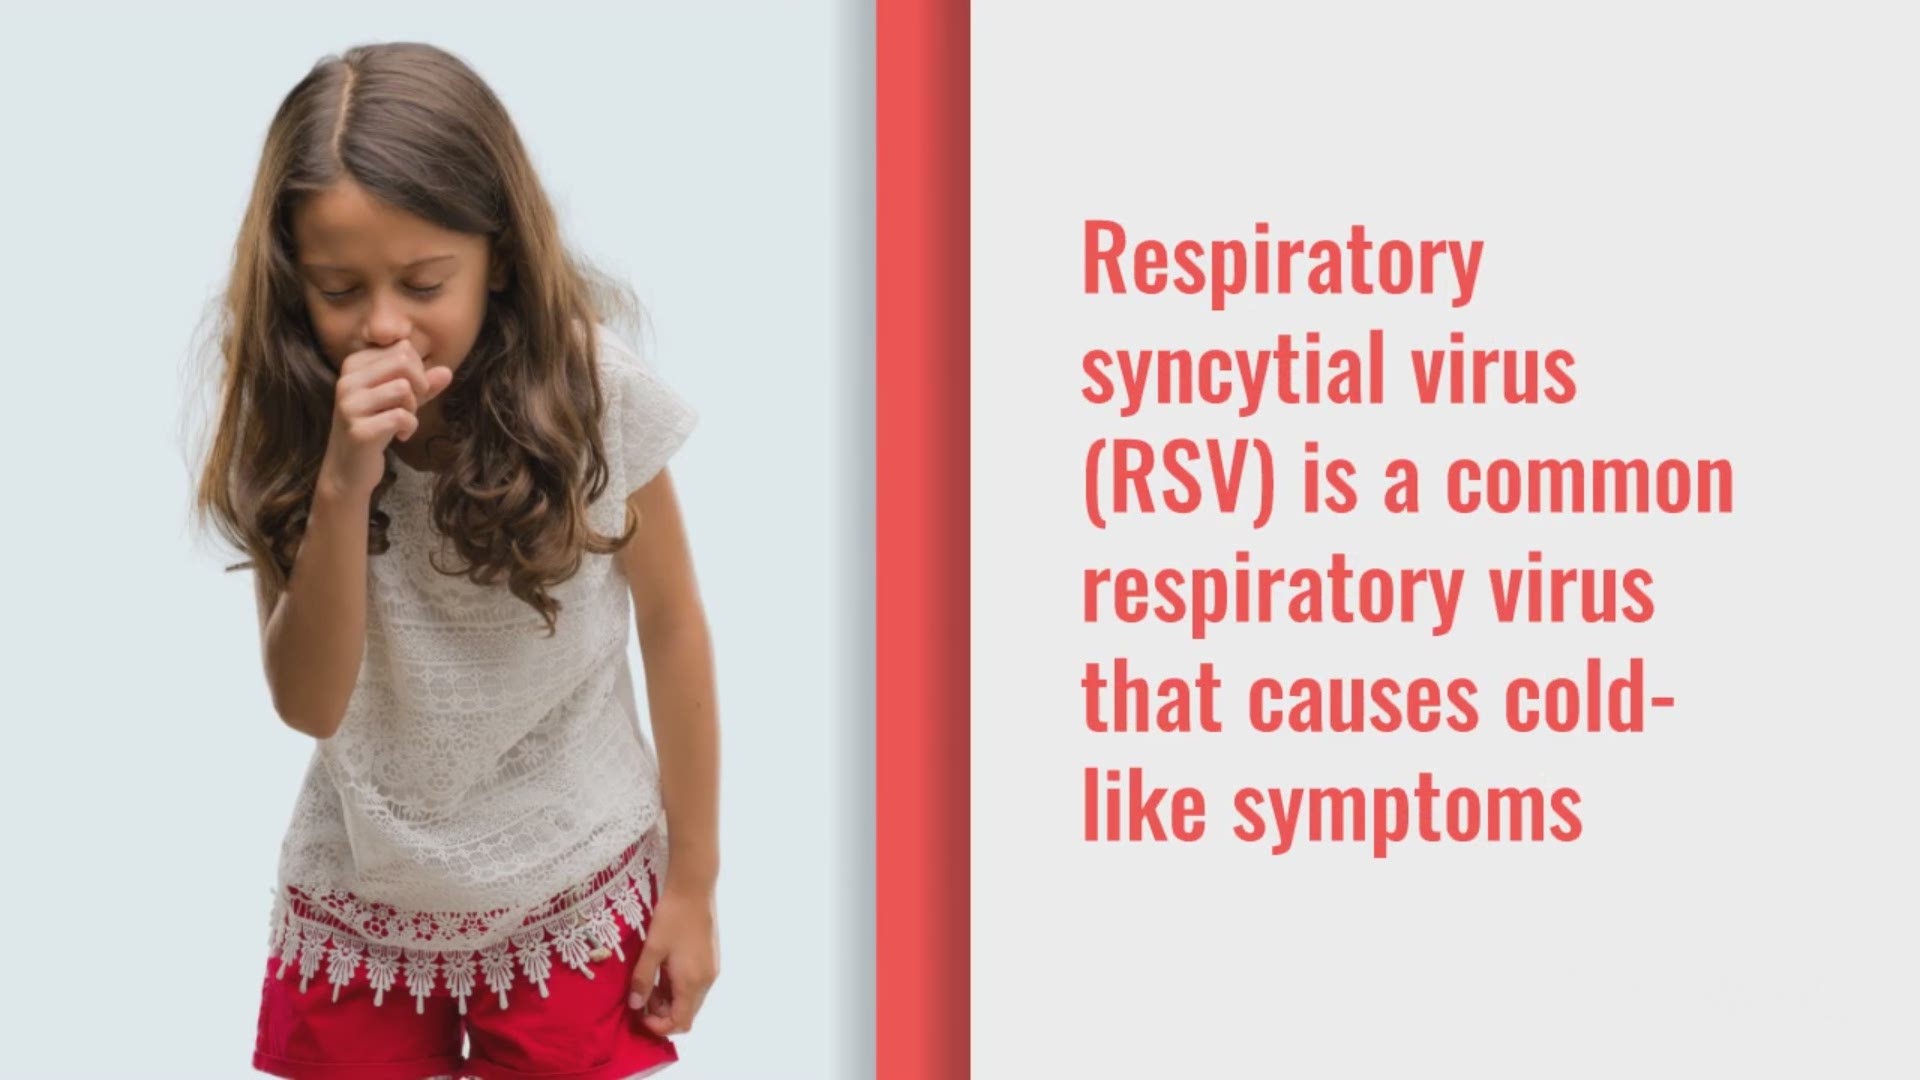 RSV cases are on the rise around the U.S. and across Texas. It's a common respiratory virus, but it can be serious for small children.